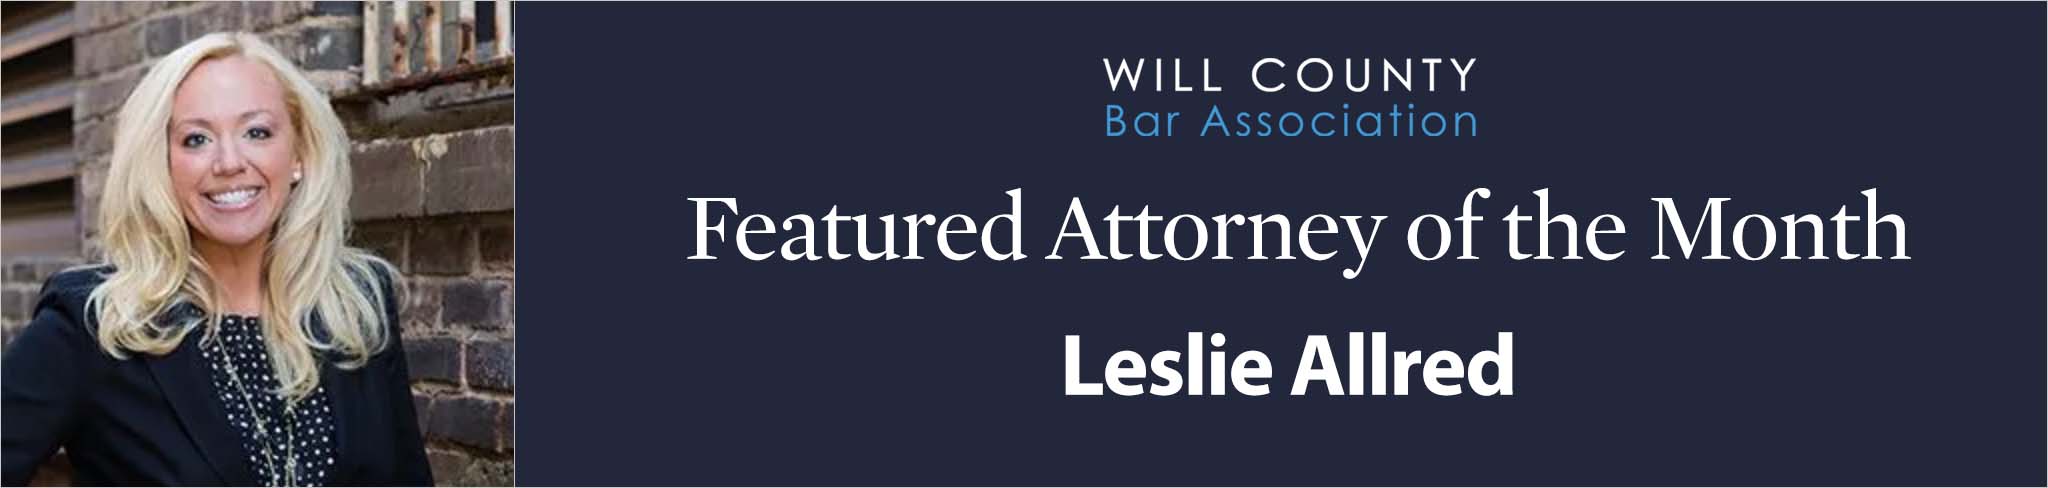 Featured Attorney of the Month Leslie Allred